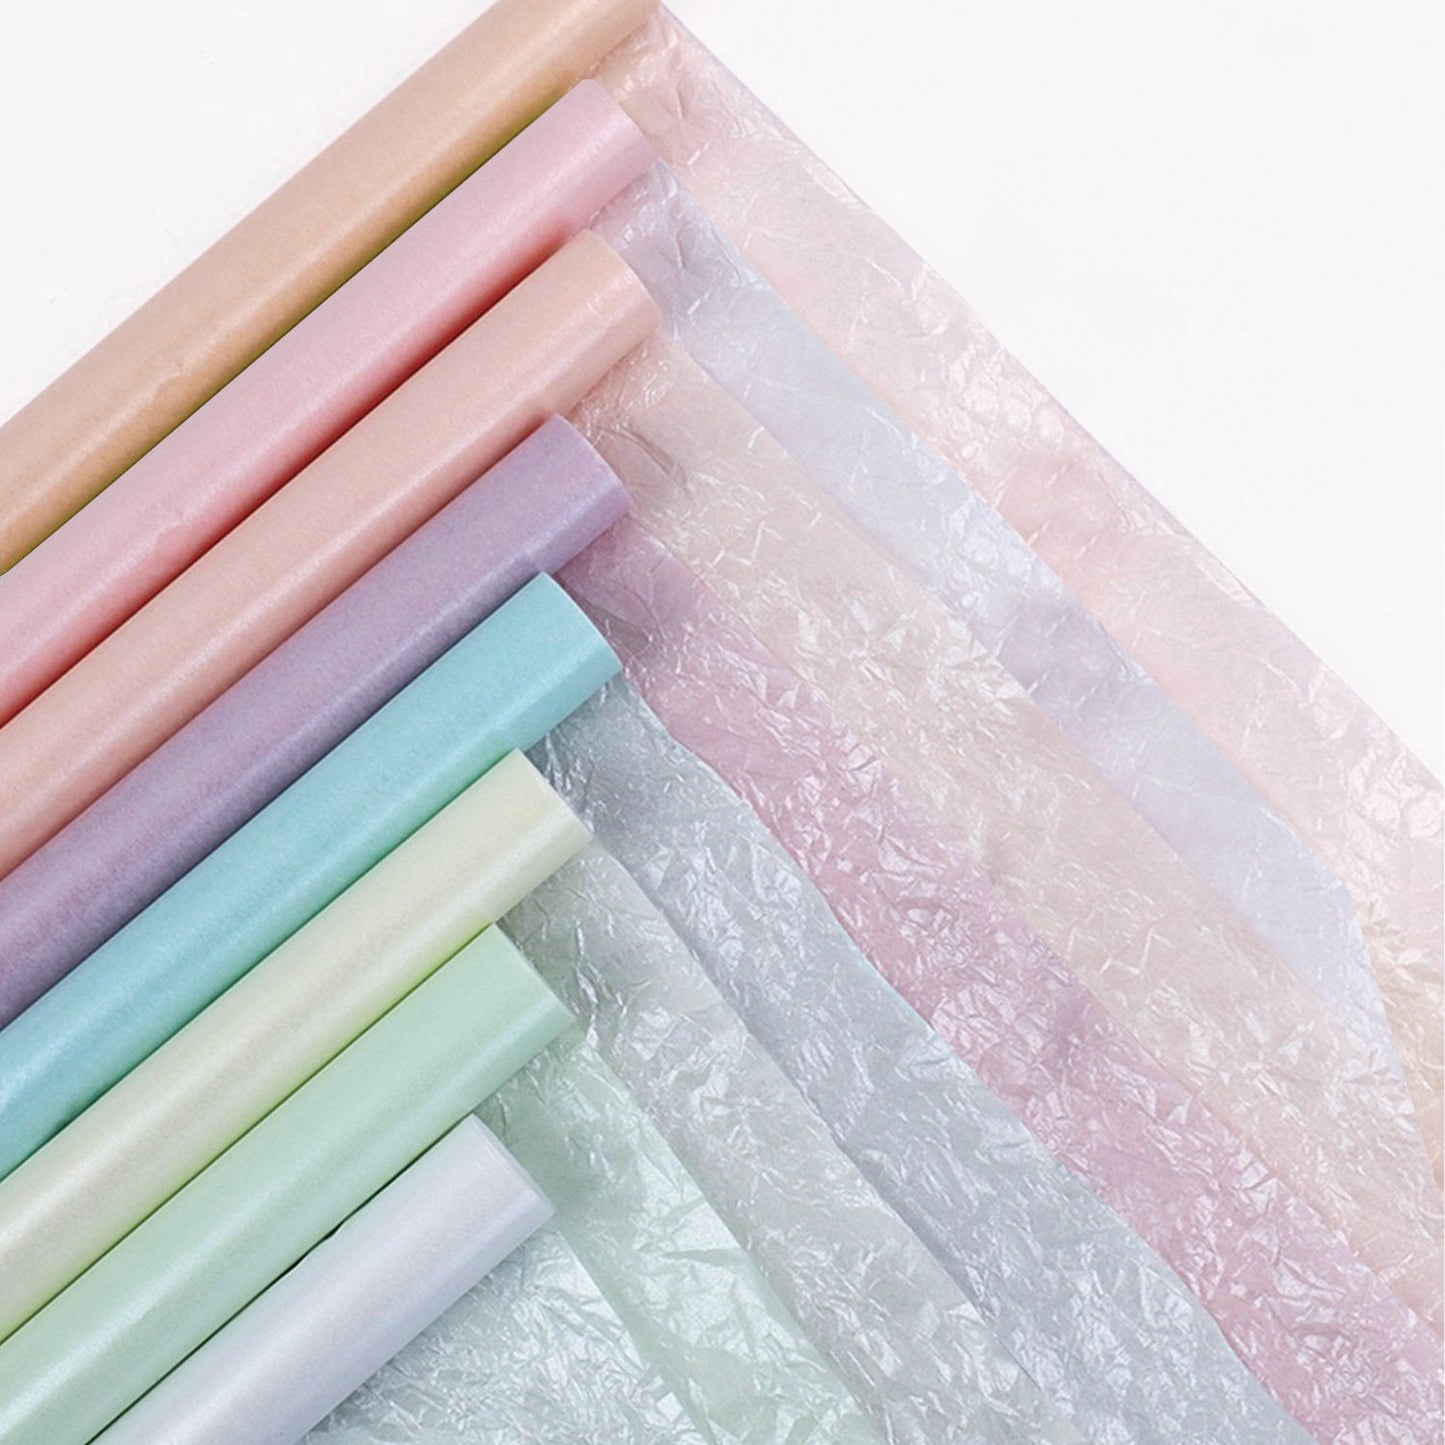 100sheets Champagne 19.7x27.6 inches Pearlized Tissue Paper; $0.40/pc